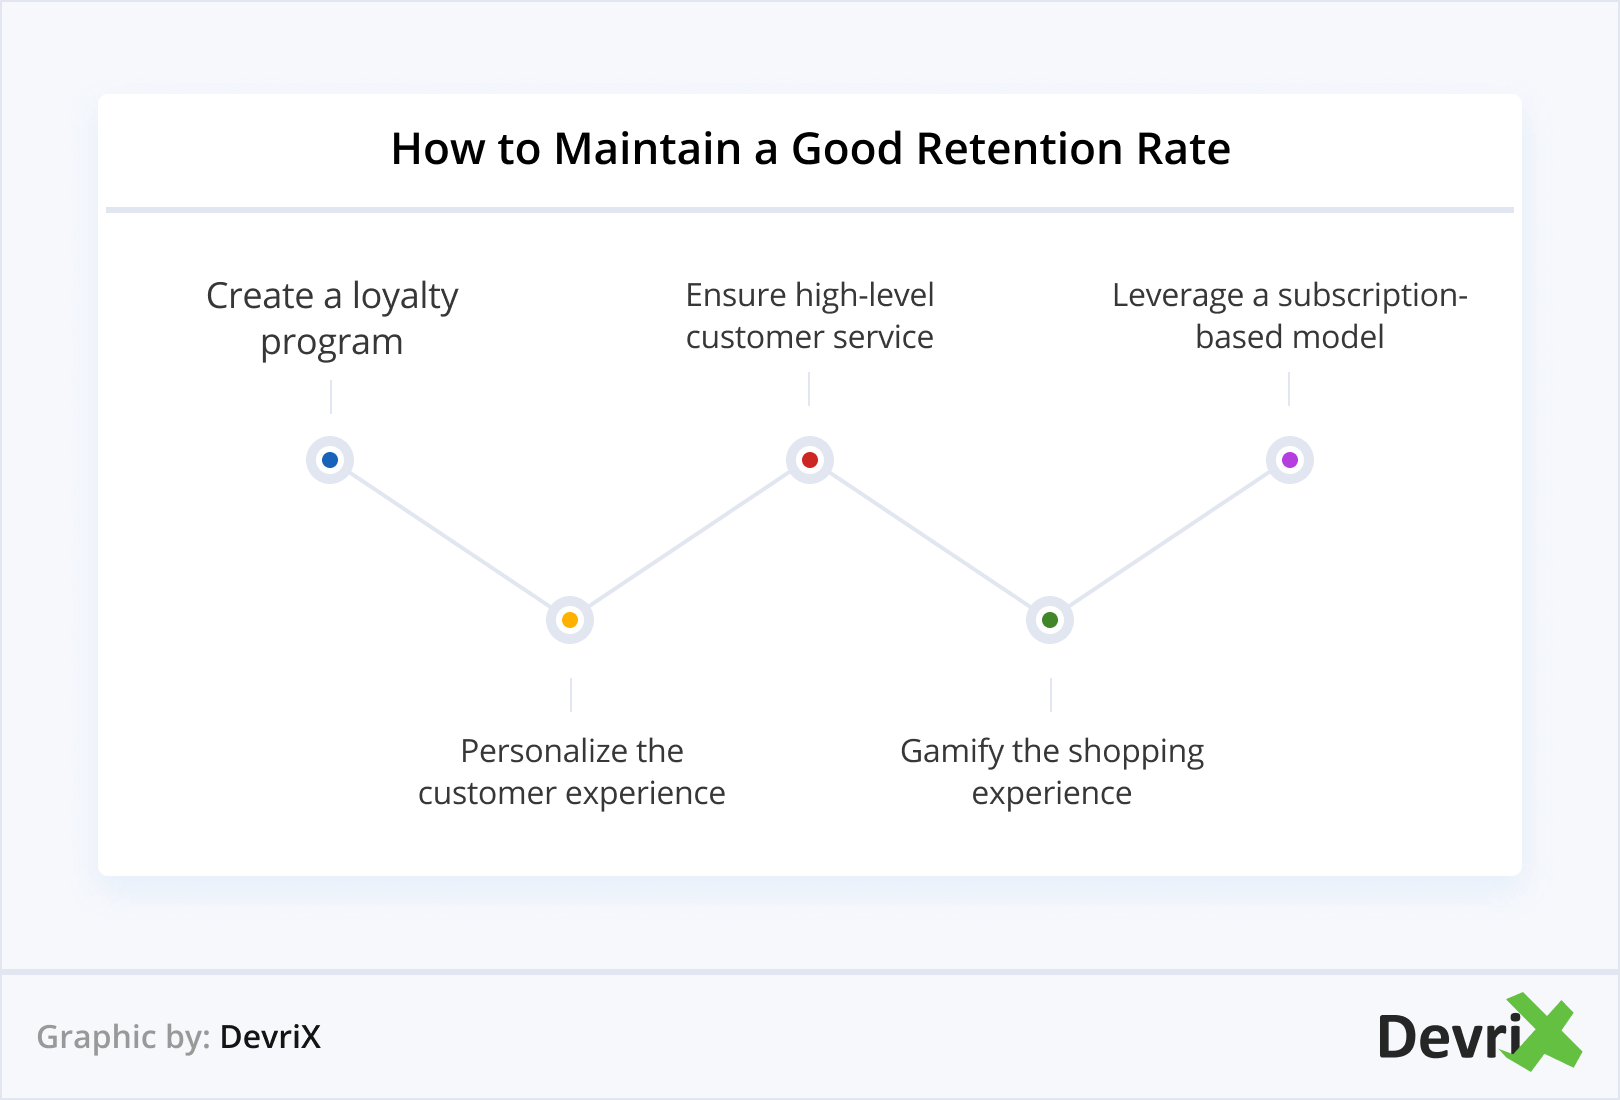 How to Maintain a Good Retention Rate